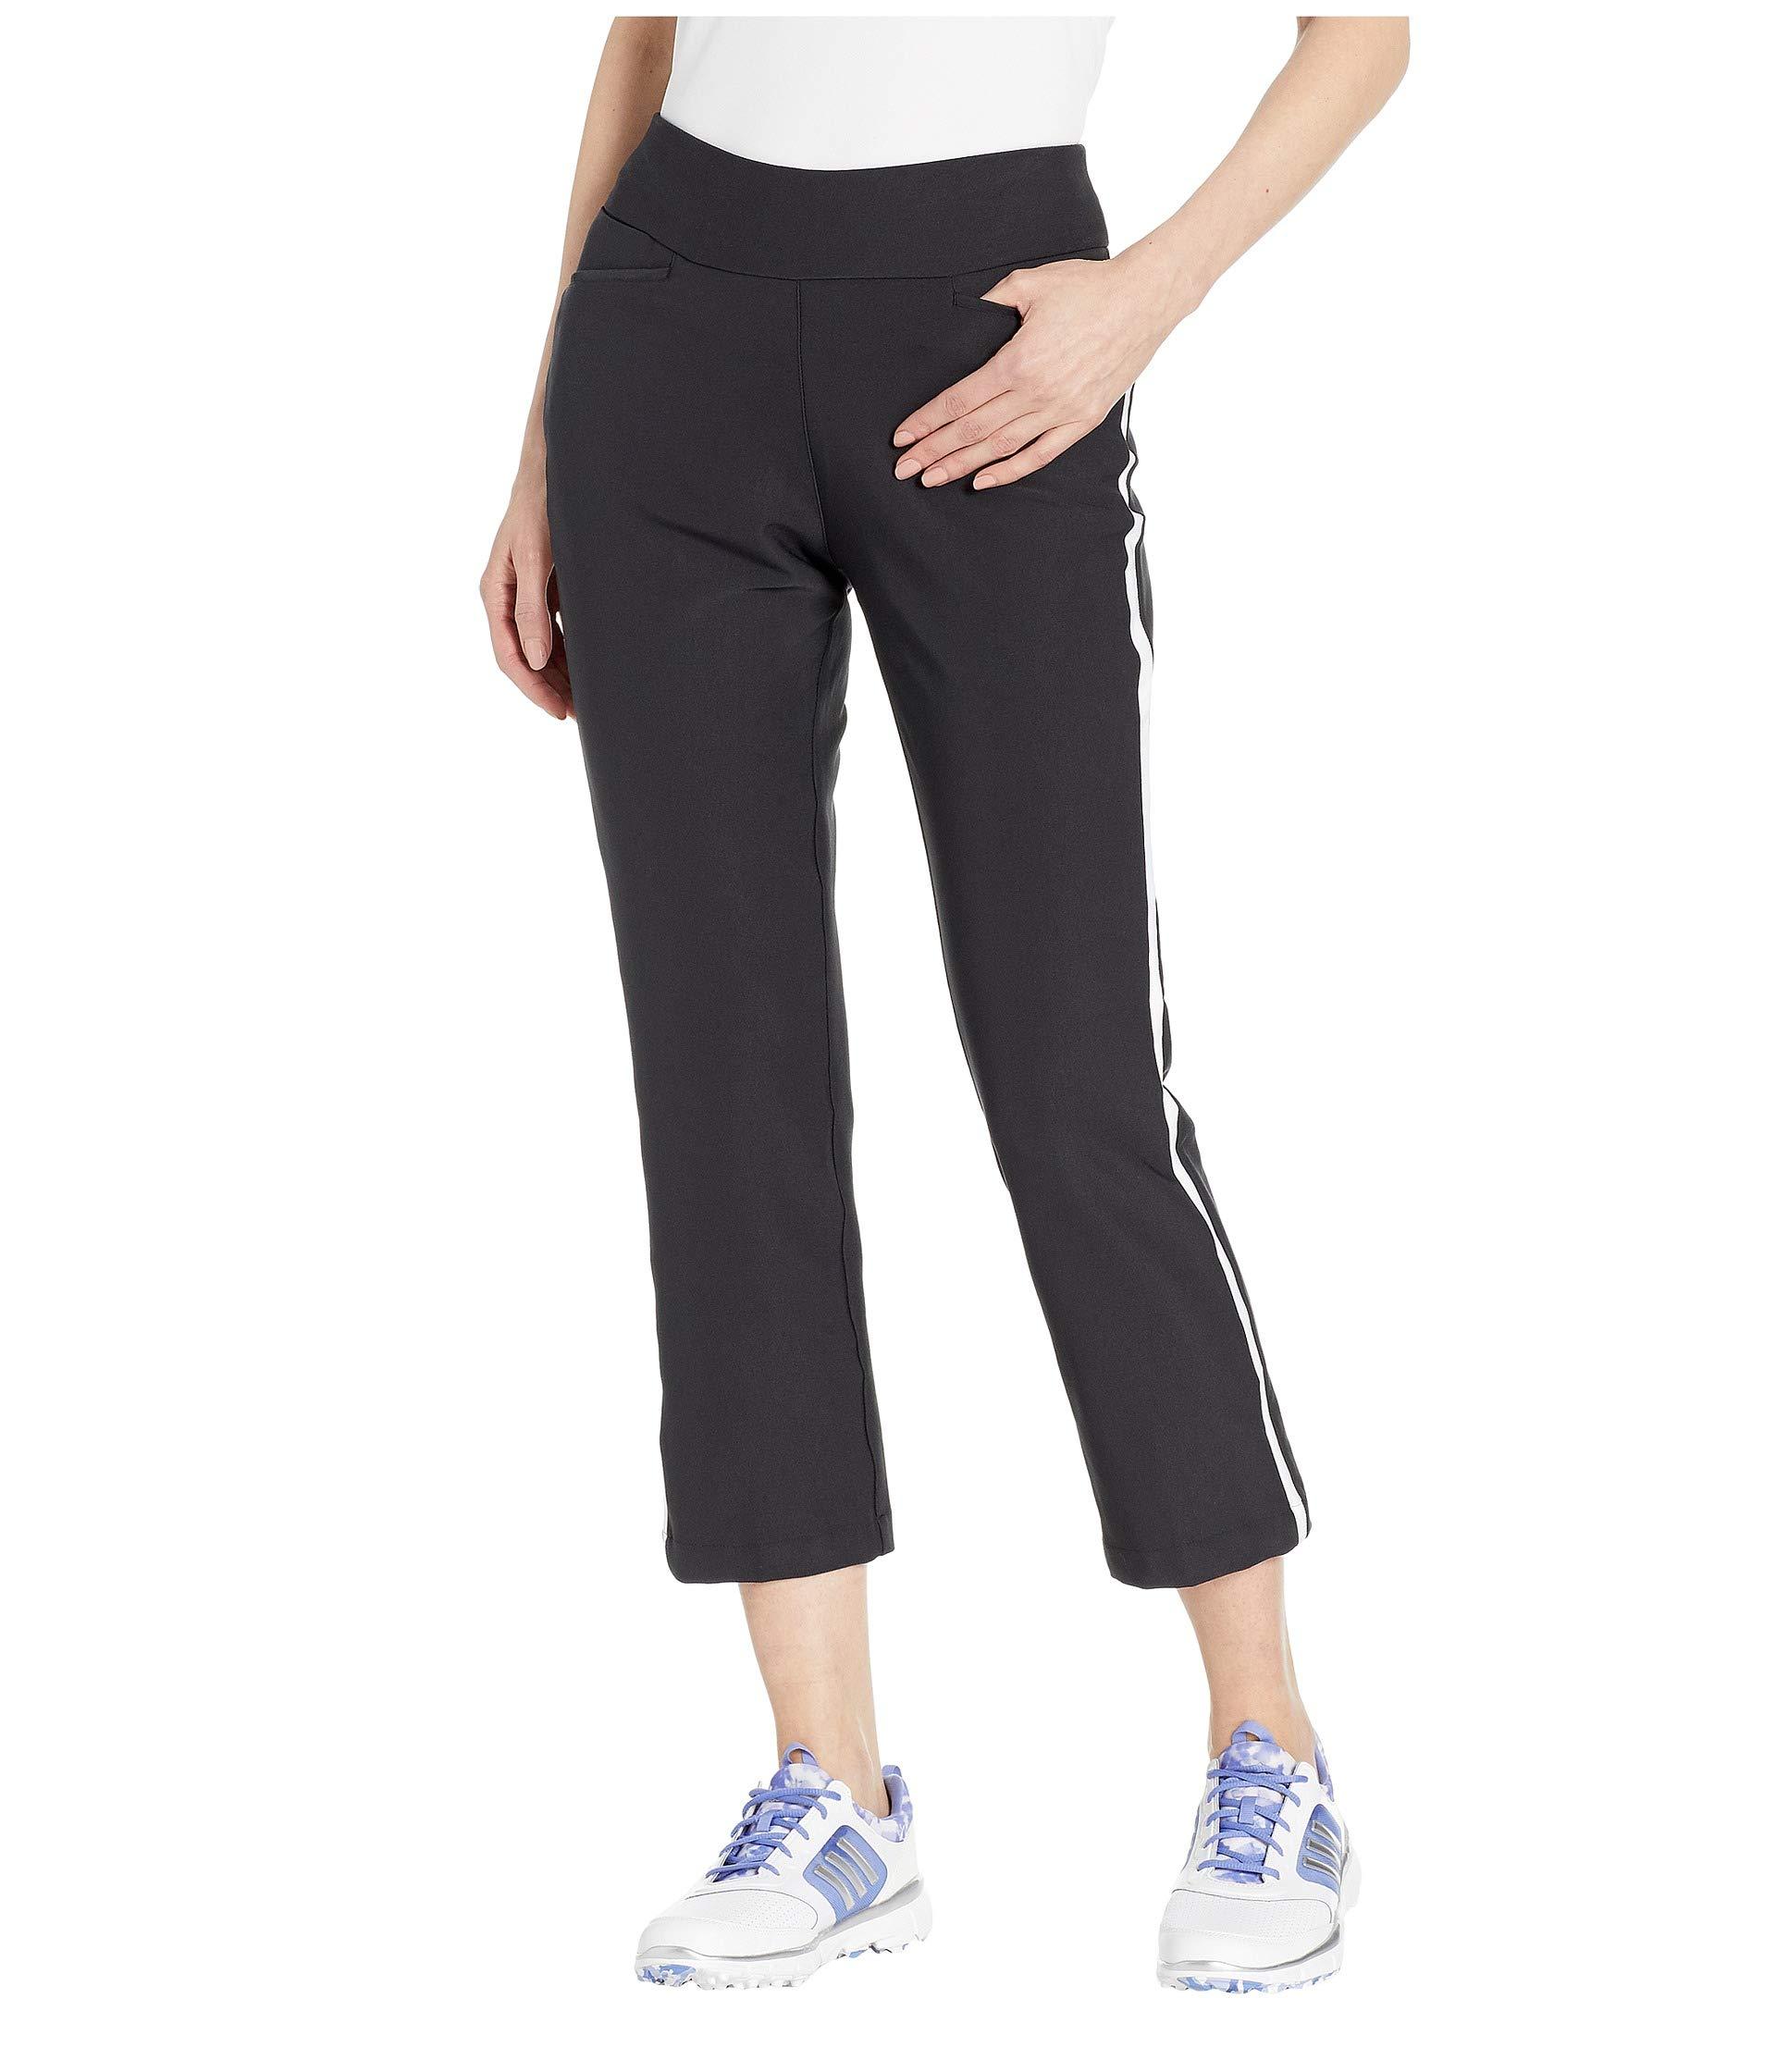 Lyst - adidas Originals Novelty Flare Cropped Pants (black) Women's ...